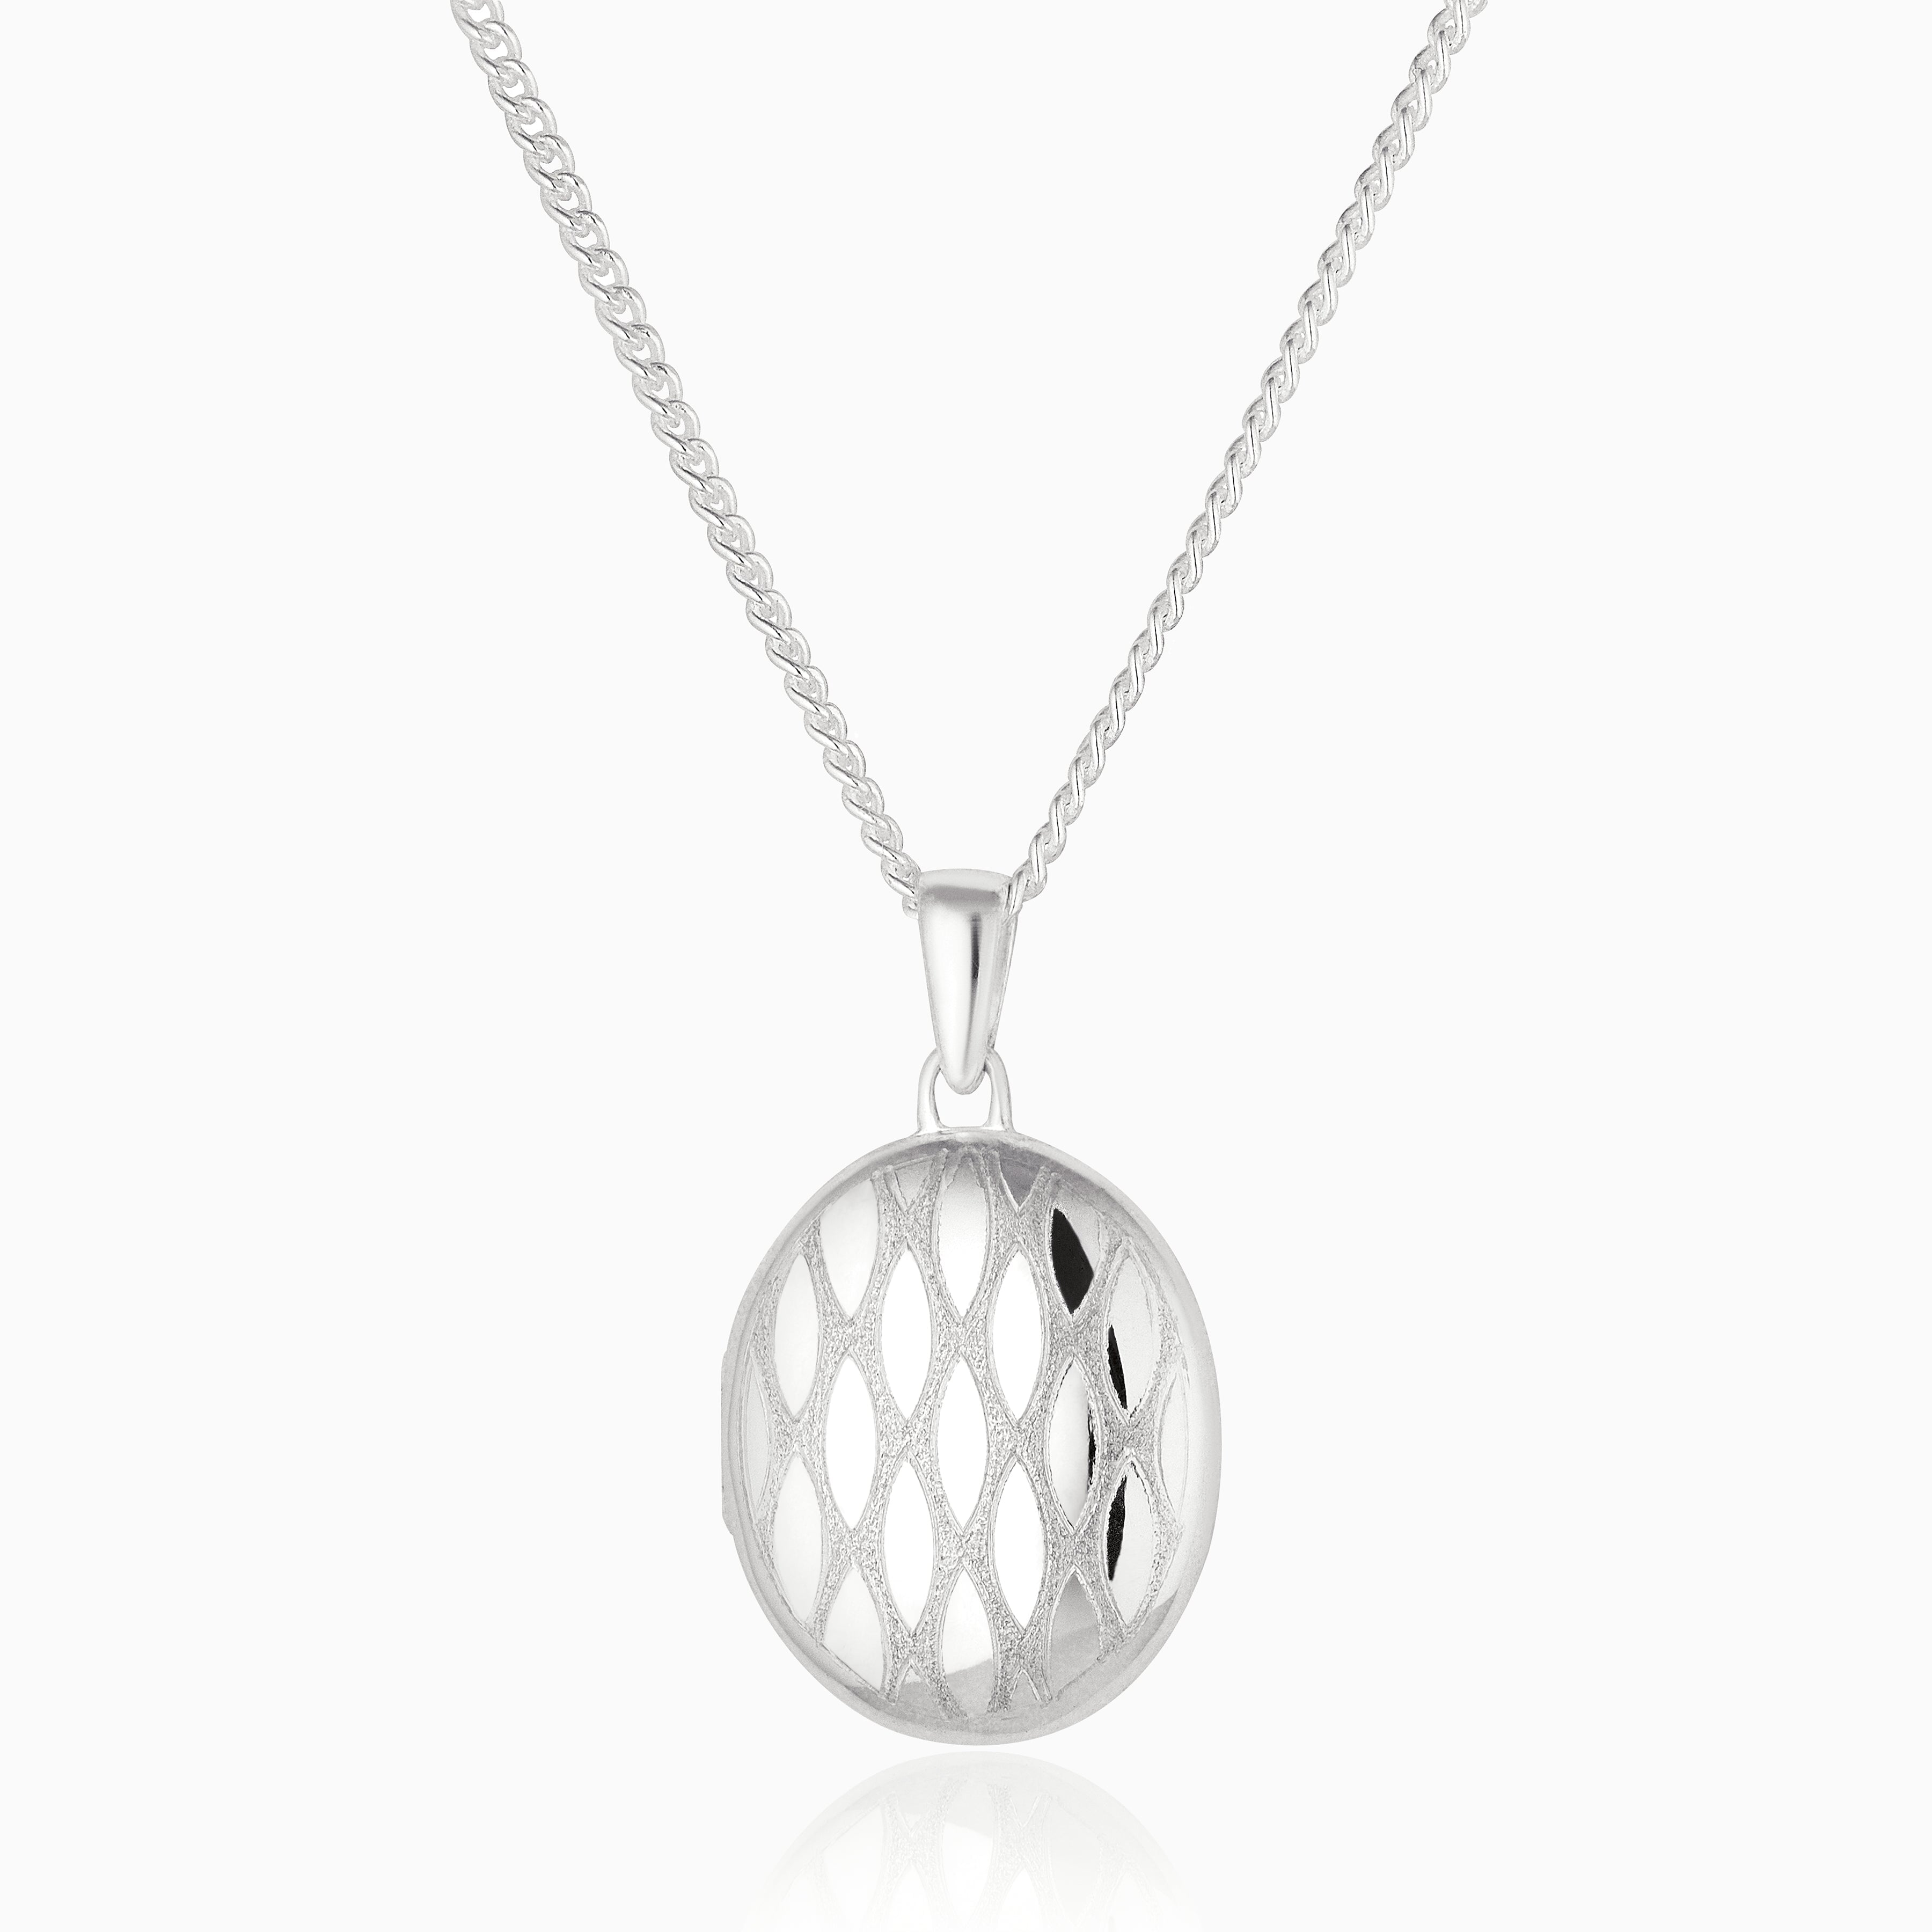 Product title: Silver Trellis Locket, product type: 